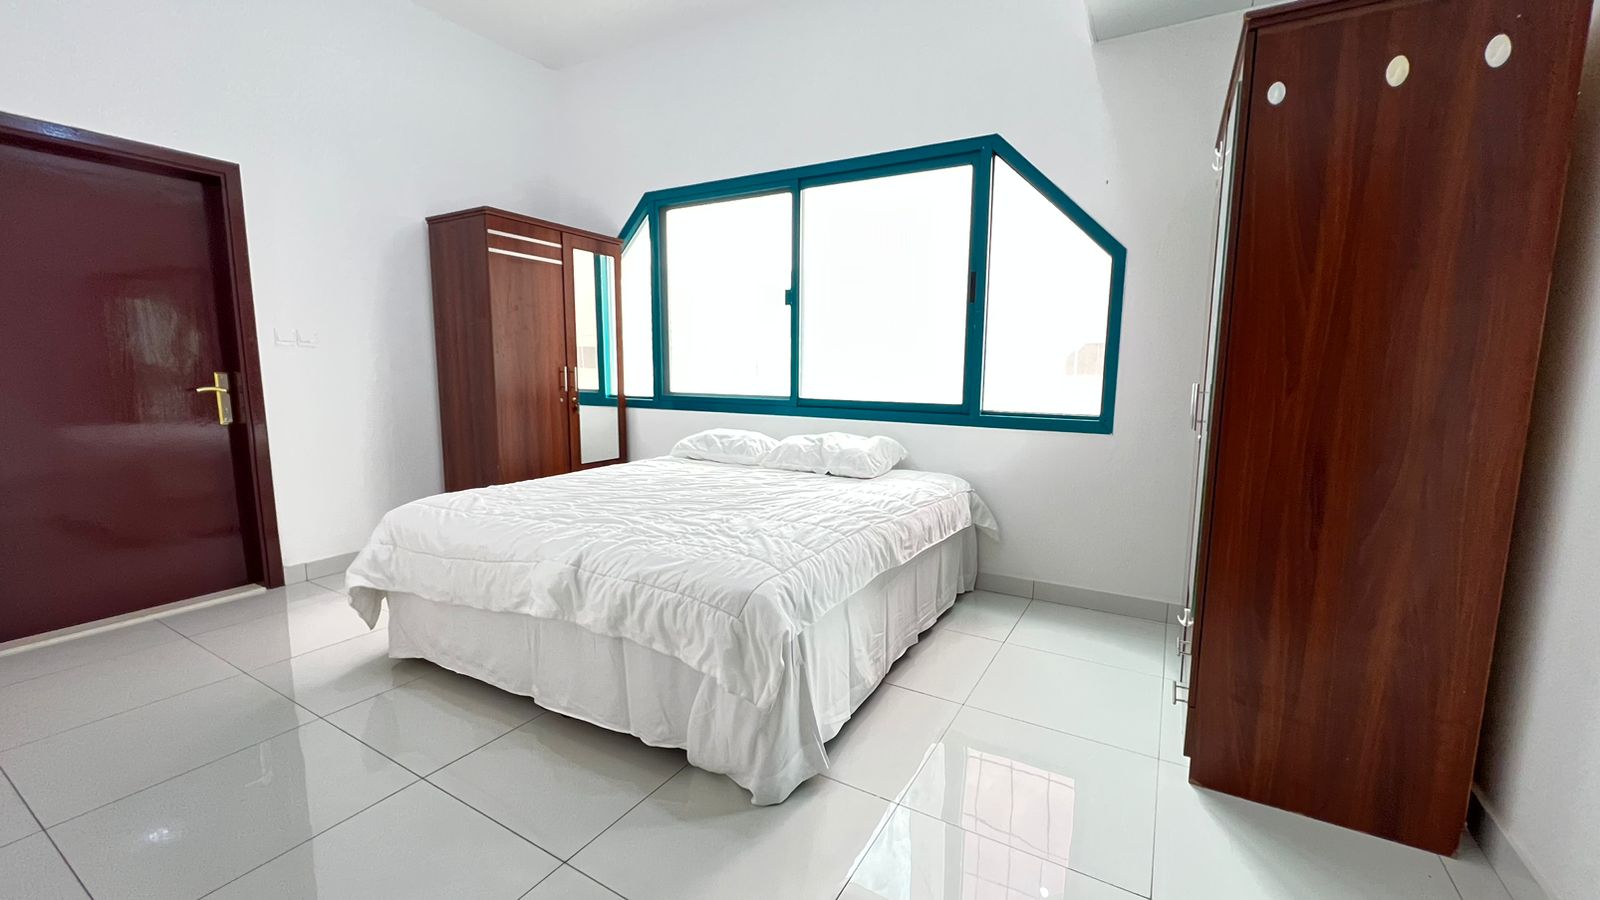 MAID ROOM, Bed Space Available For Rent In Electra Street Abu Dhabi AED 1200 Per Month